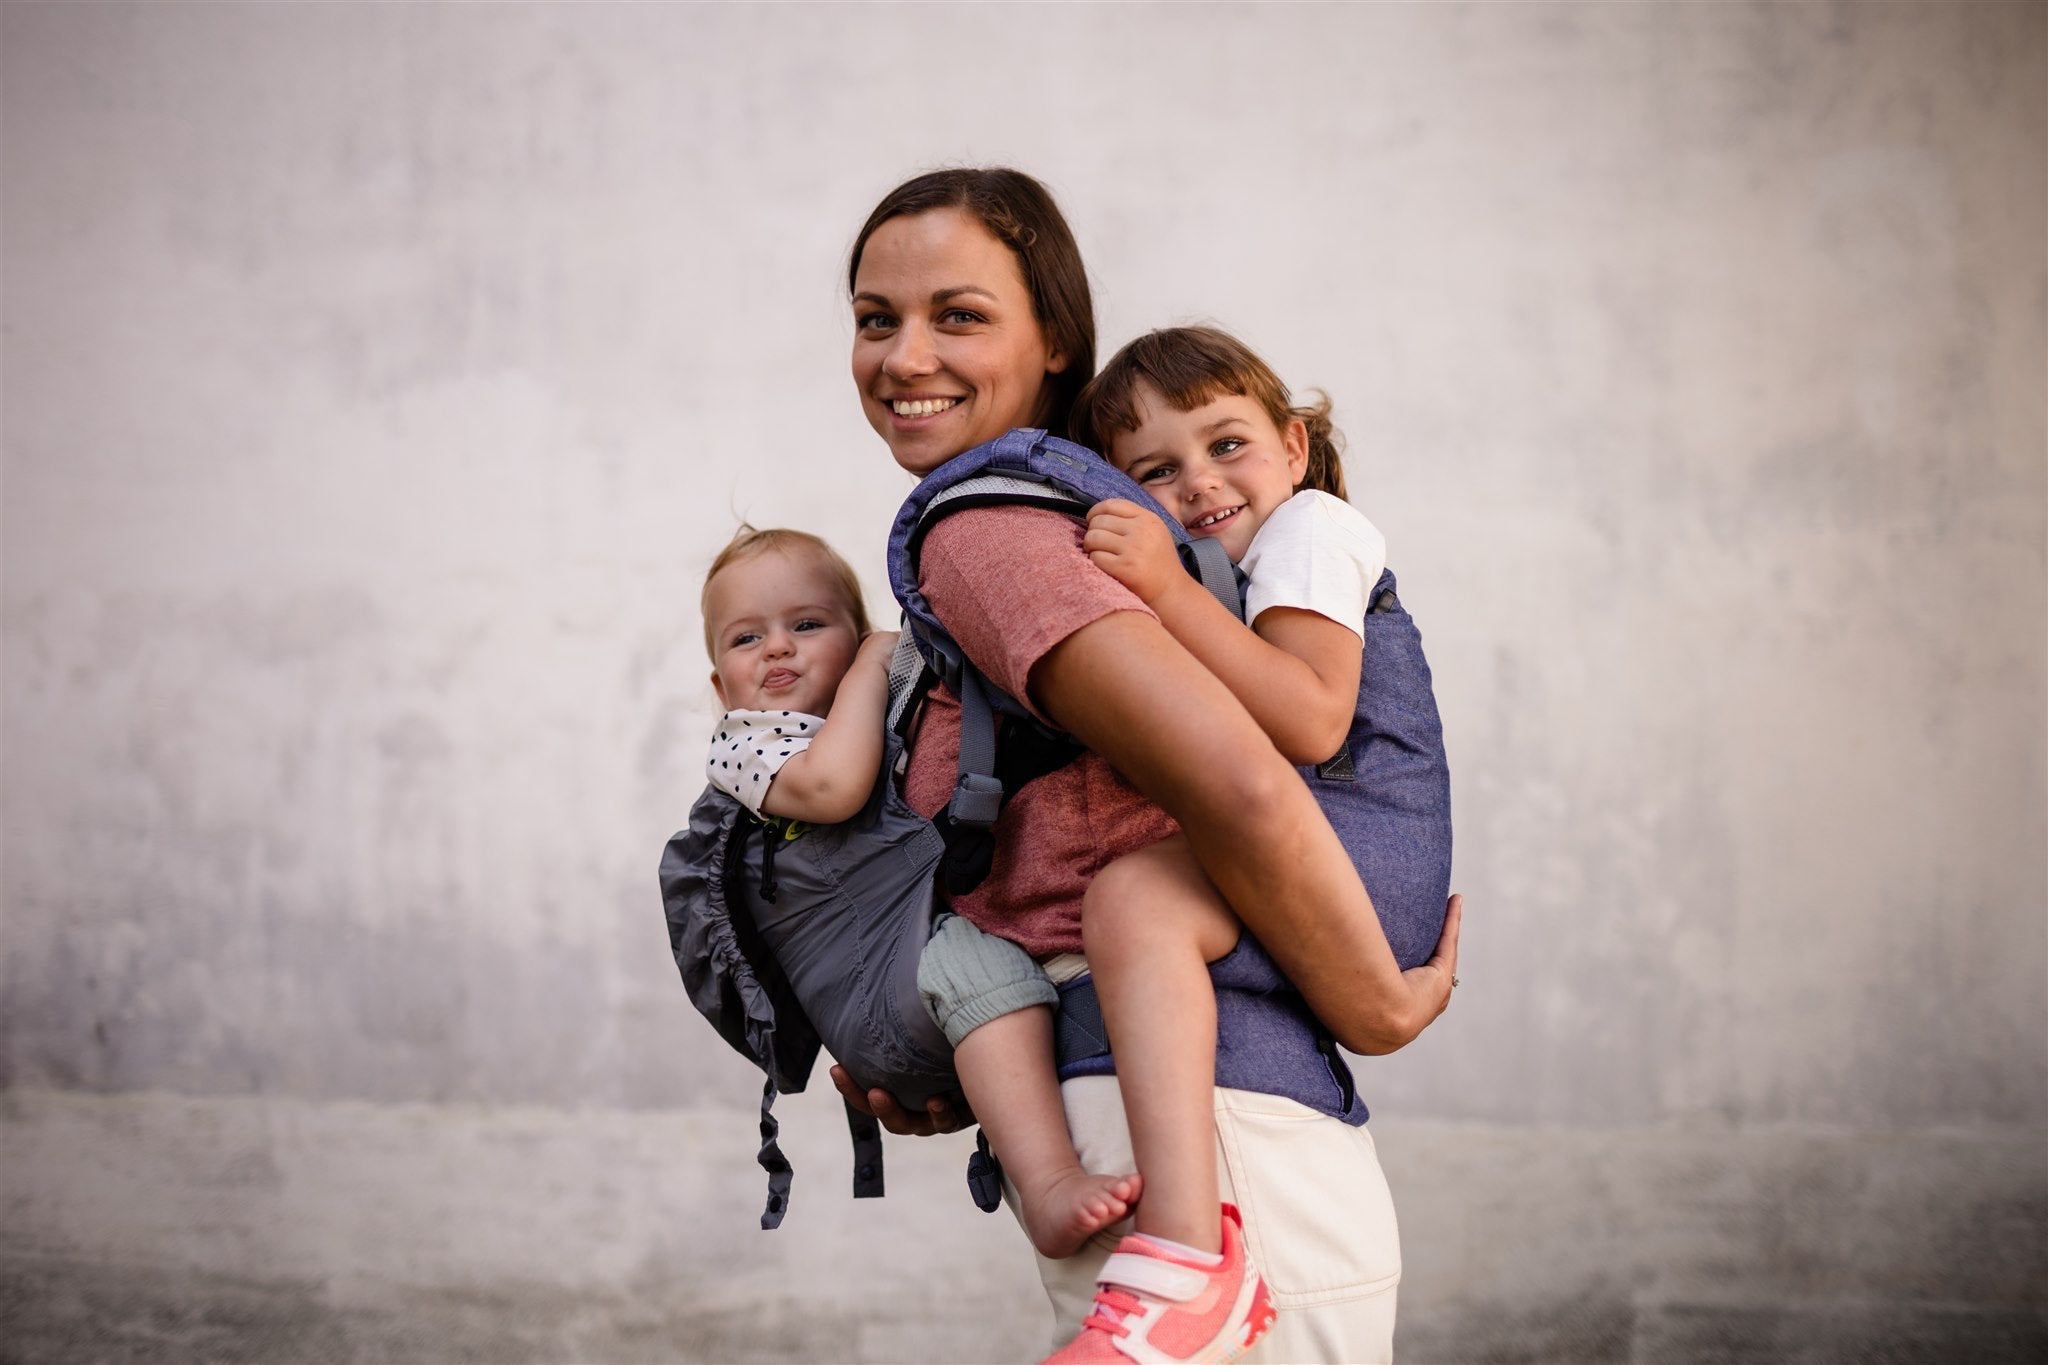 Smiling mom standing outside with her two daughters in carriers. Her baby is in the front being carried in the Boba Air and the toddler baby girl is on her back being carried in the boba x chambray ergonomic baby carrier.